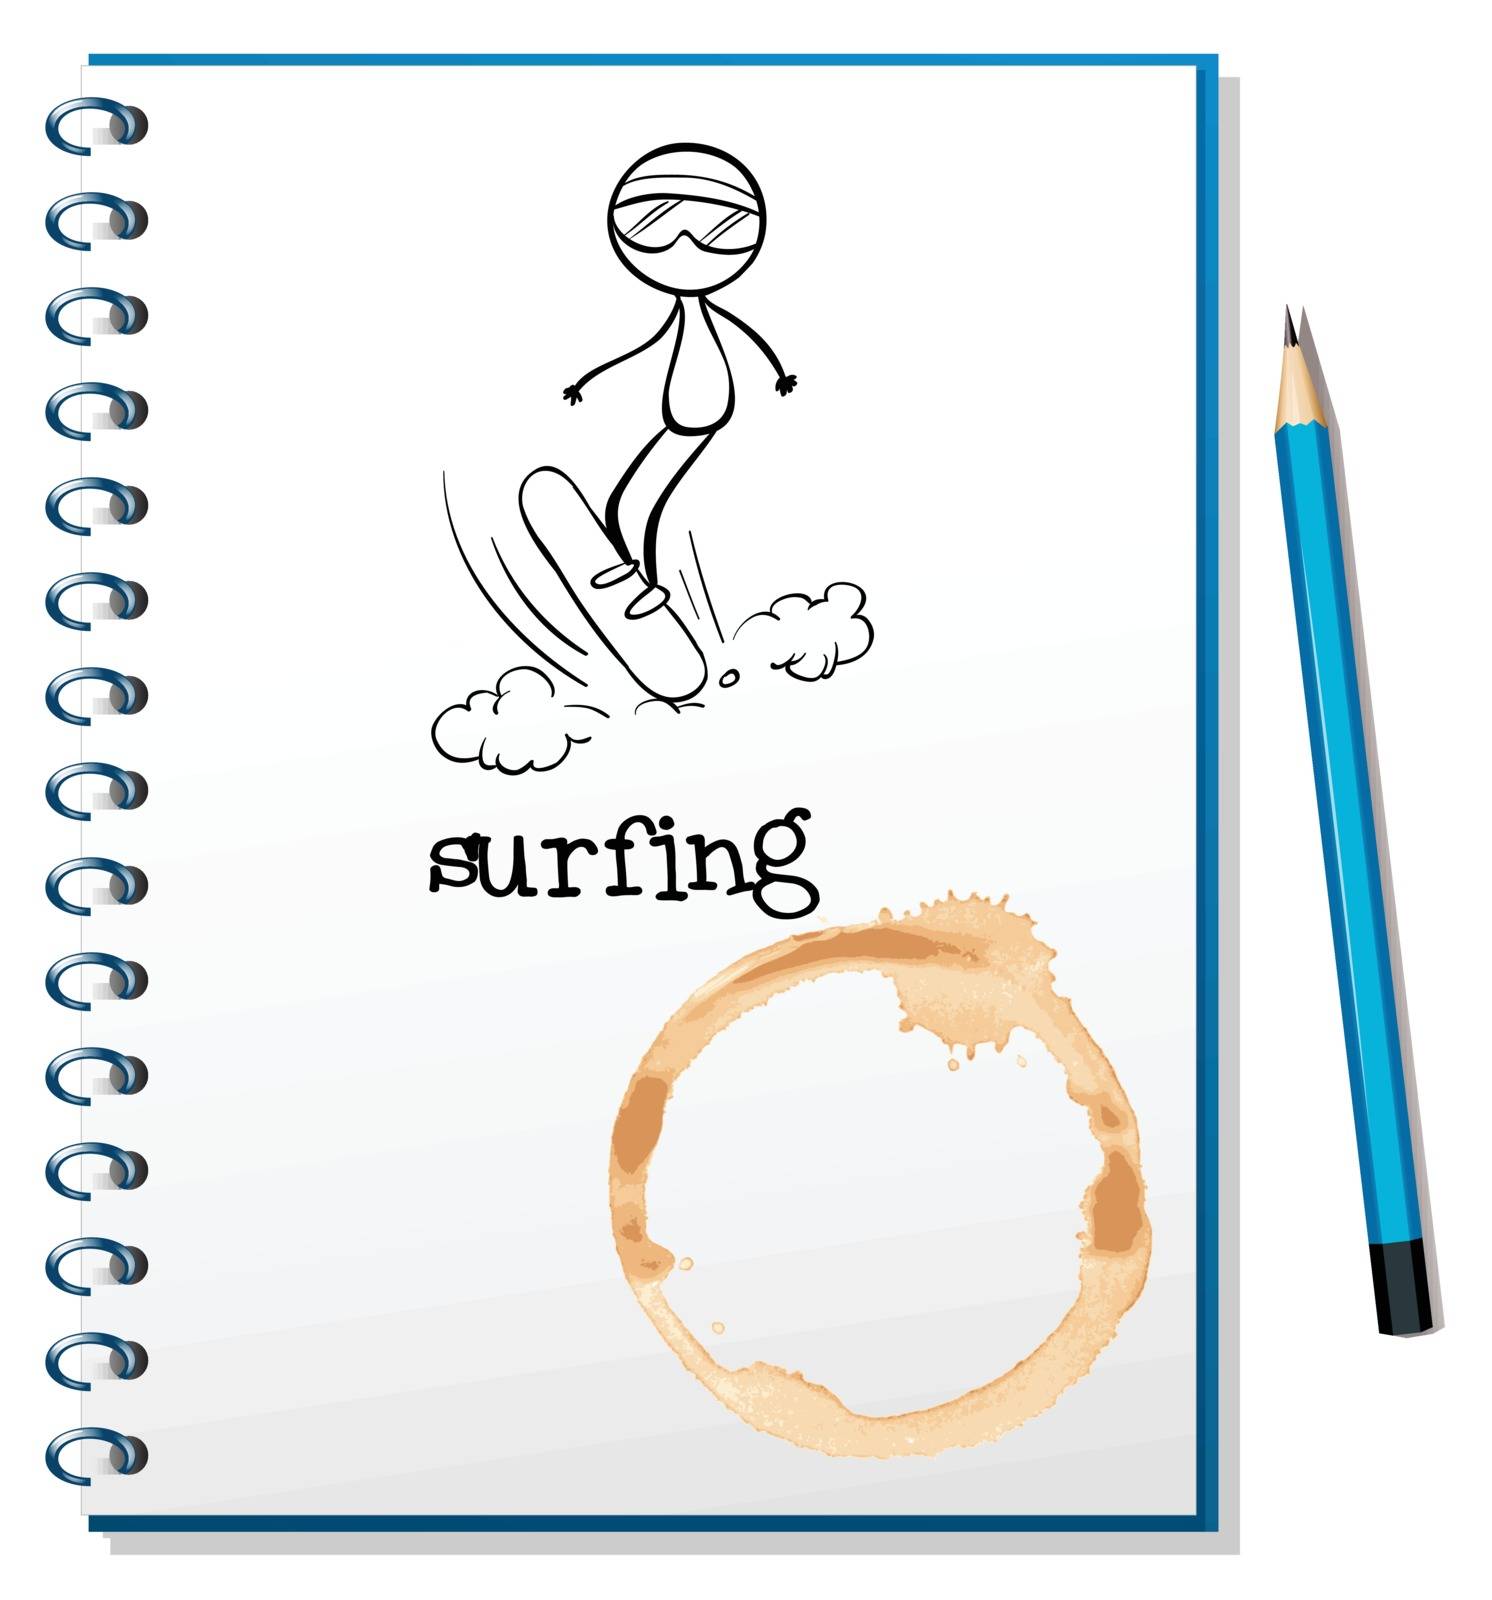 A notebook with a sketch of a person surfing by iimages